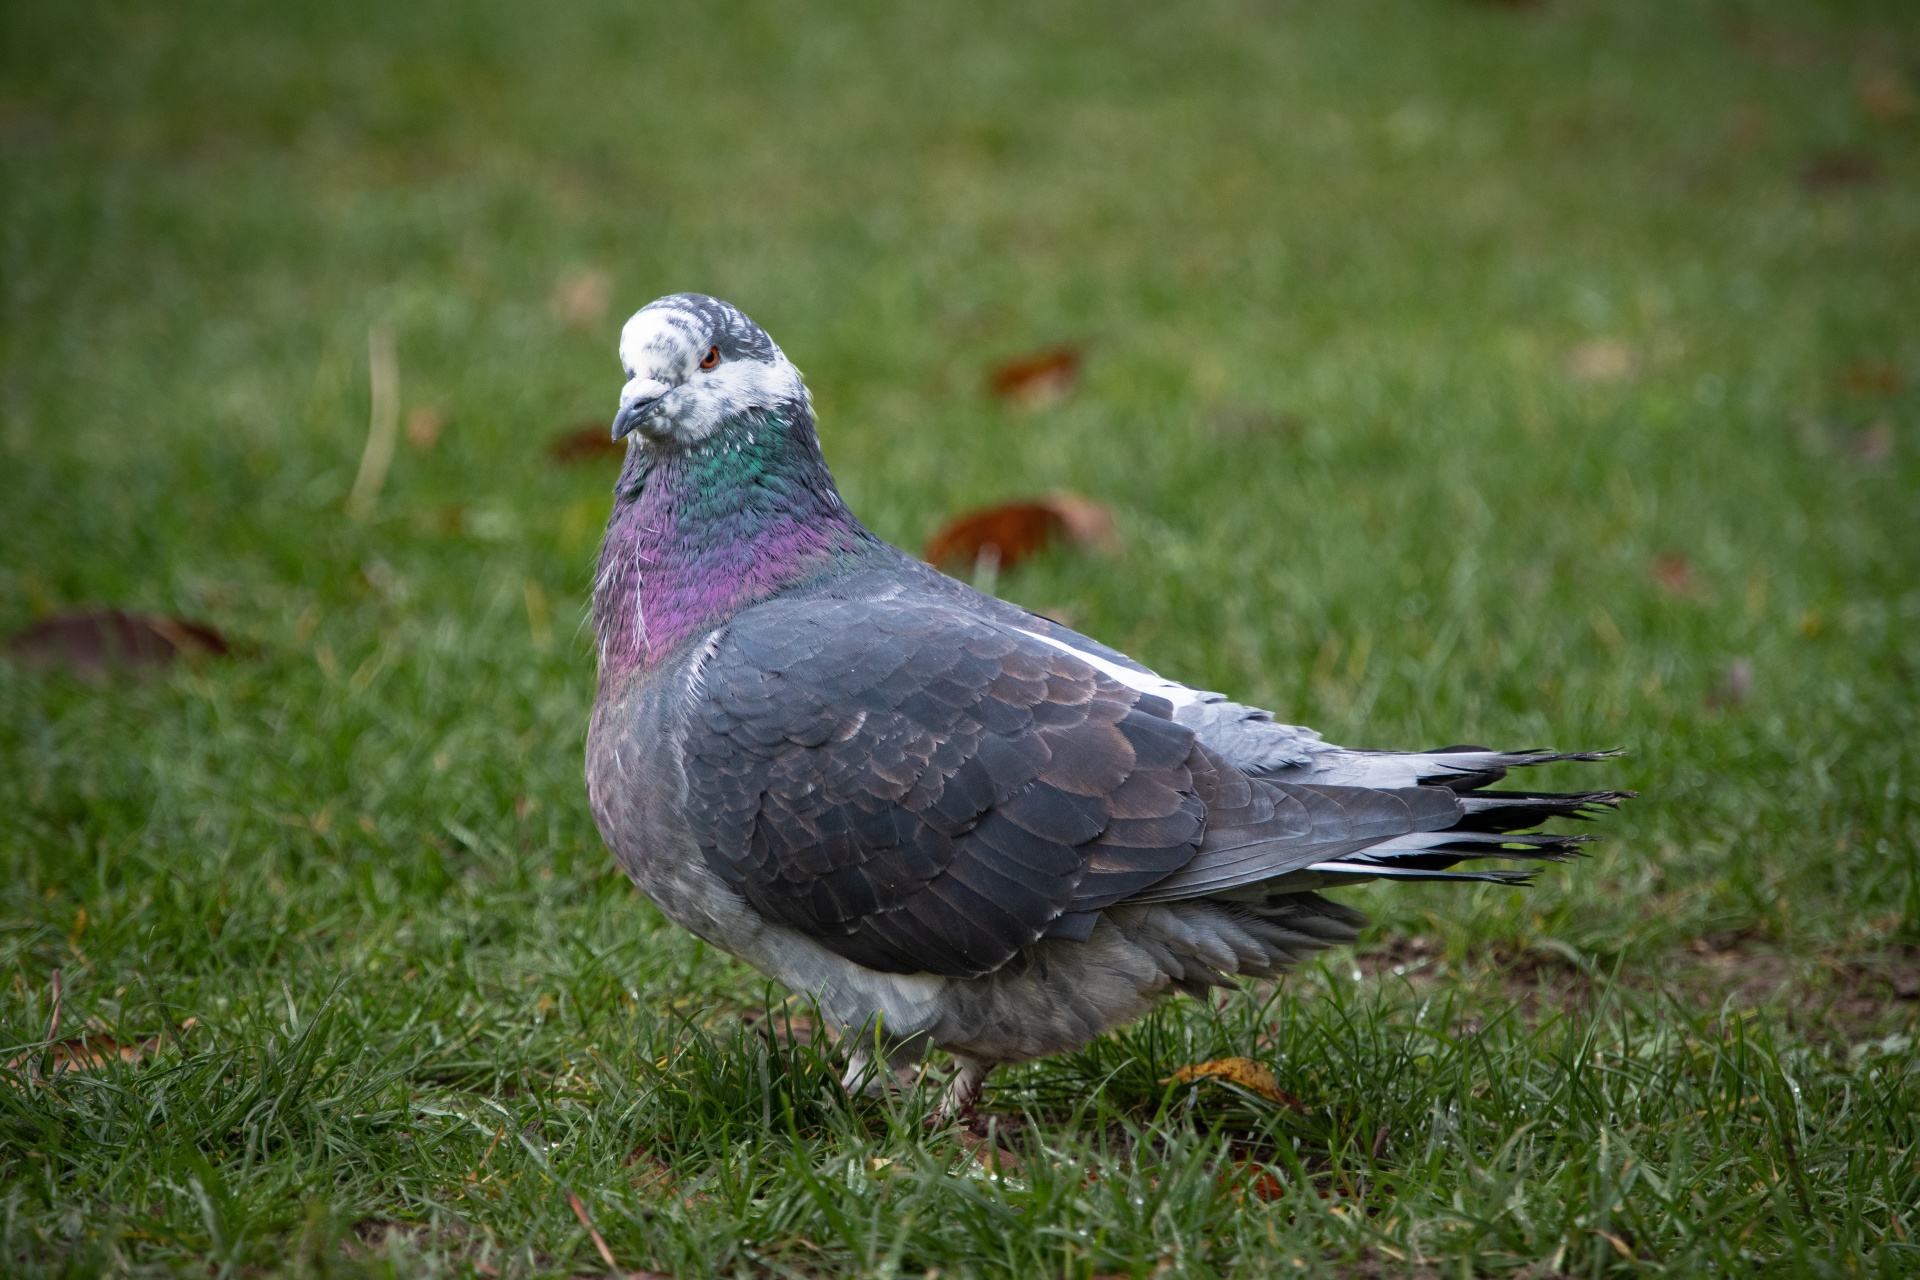 A pigeon in the grass, common pigeon, bird, ornithology, domestic pigeon, city pigeon, wallpaper